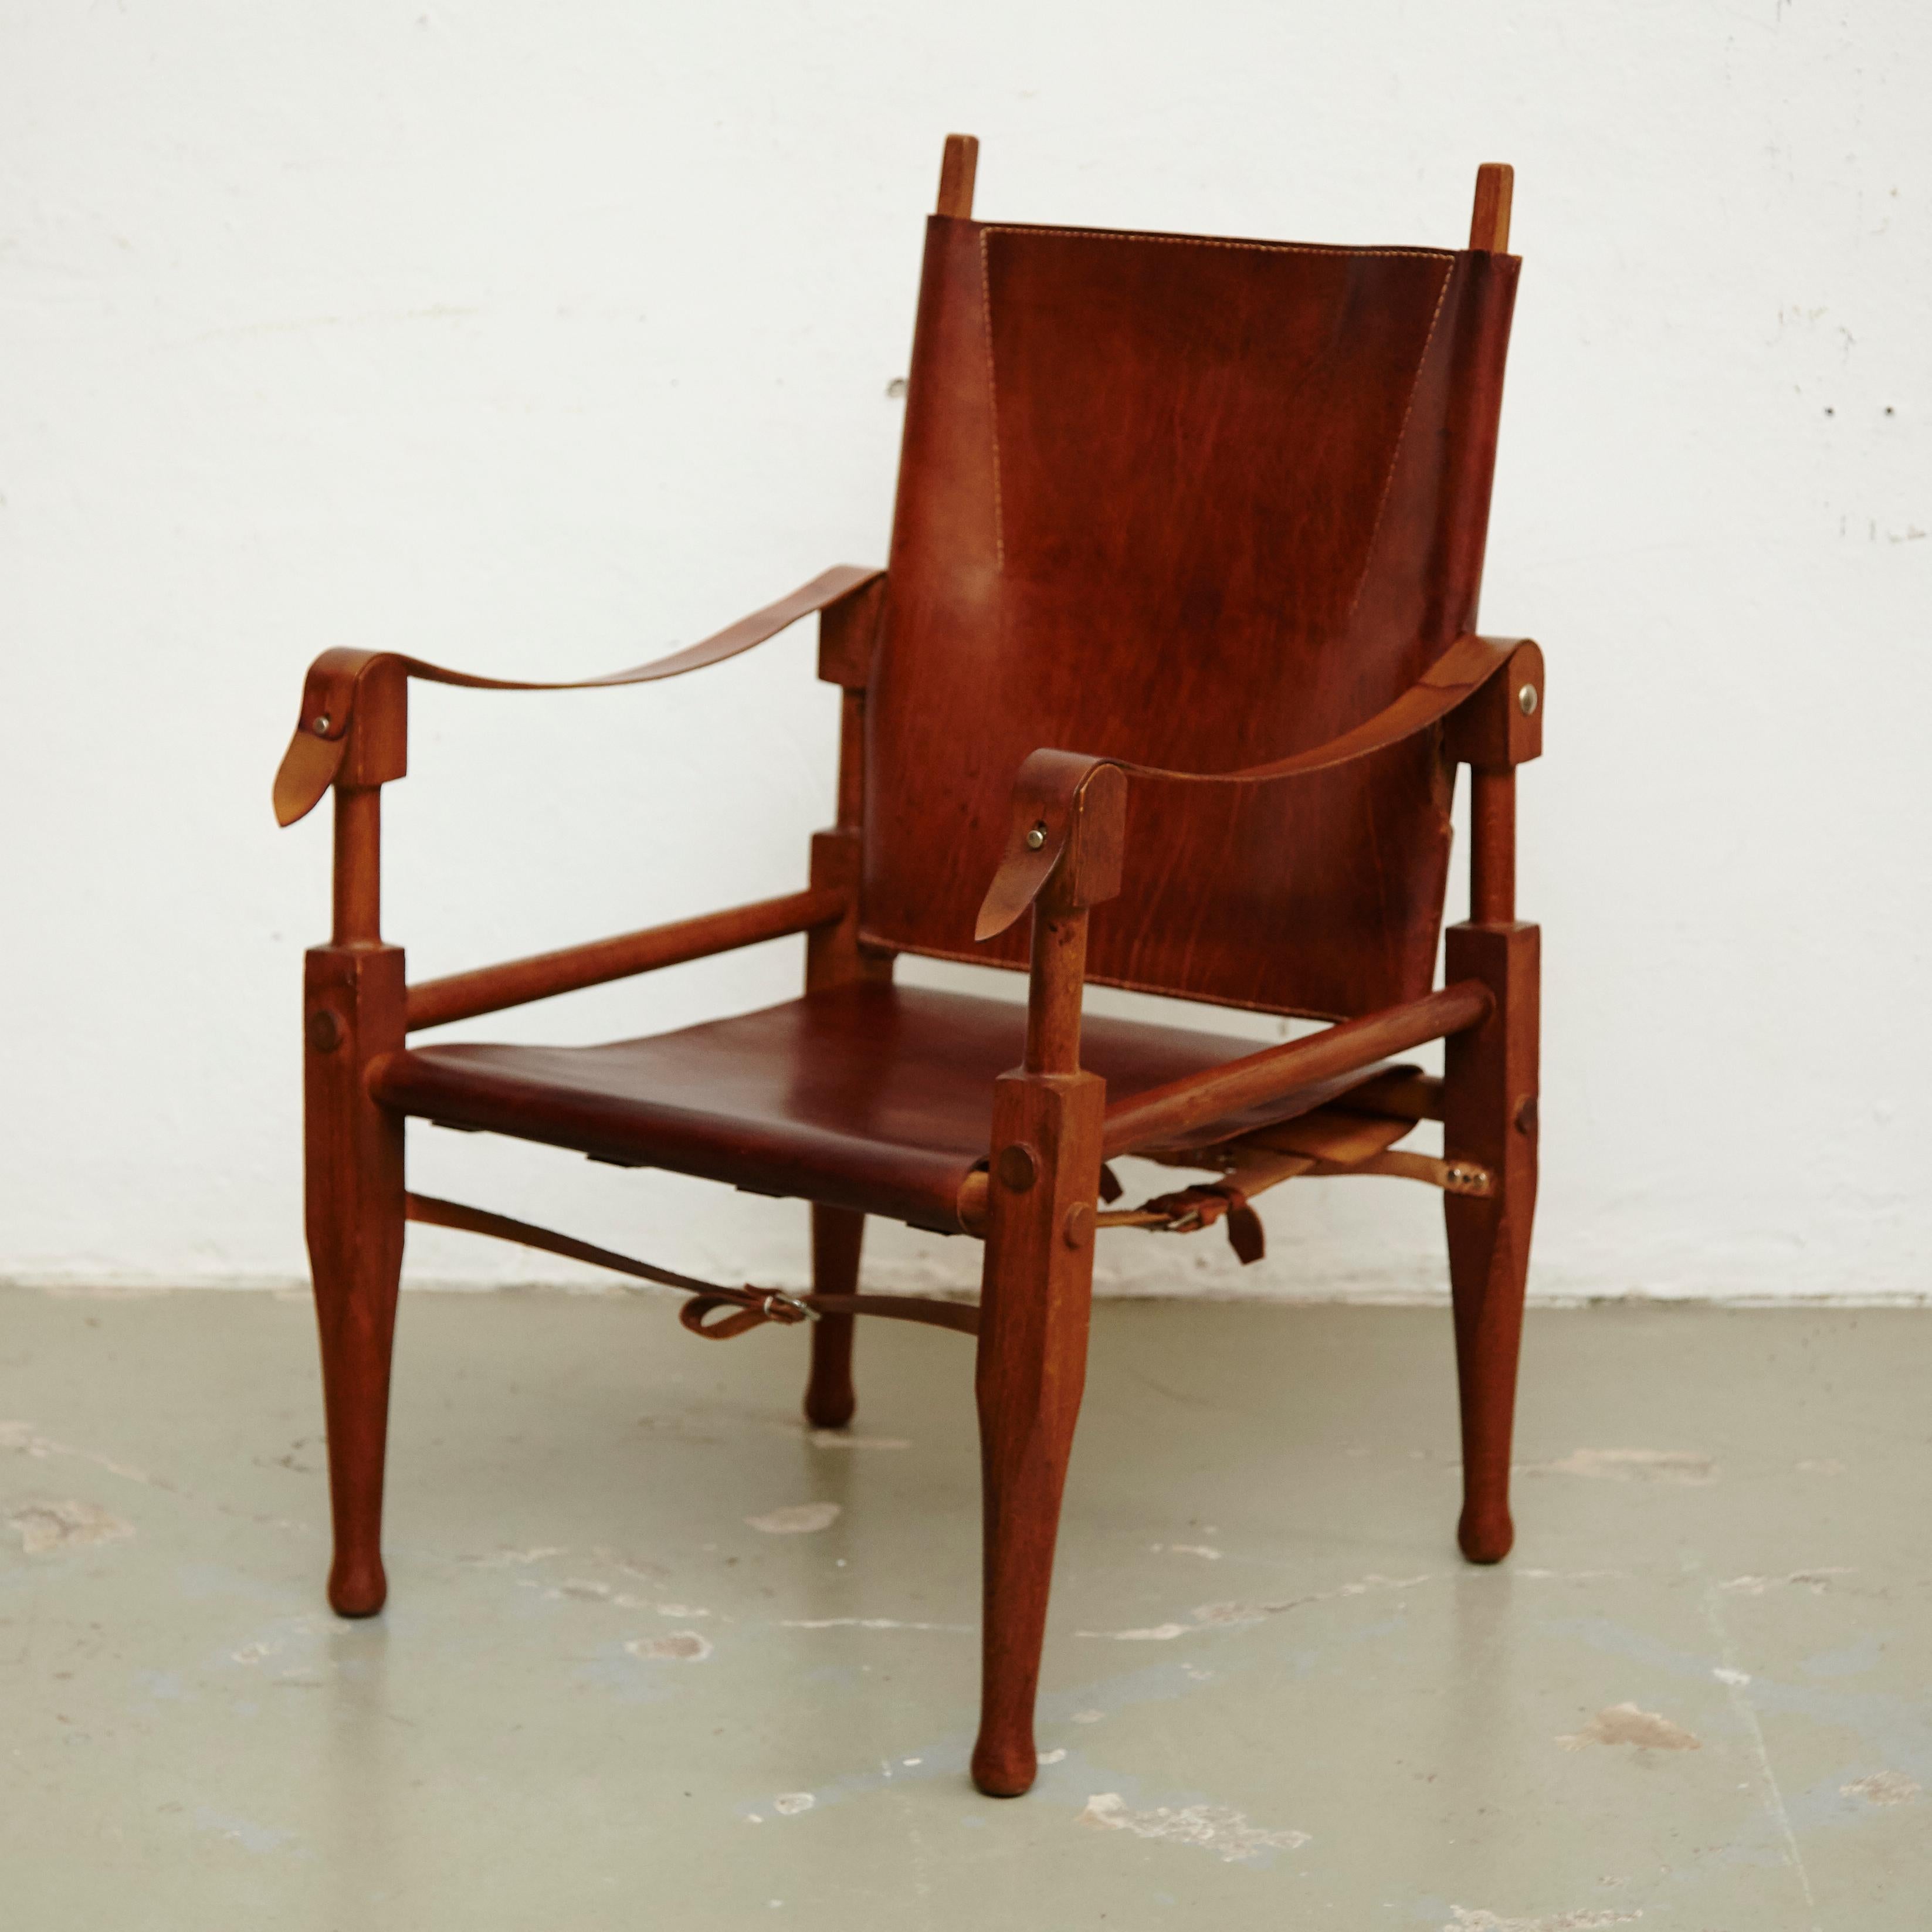 Armchair designed by Wilhelm Kienzle manufactured in Switzerland, circa 1960.

Leather Safari armchair
Measures: 90 x 56 x 56 cm

In good original condition with minor wear consistent with age and use, preserving a beautiful patina.

 